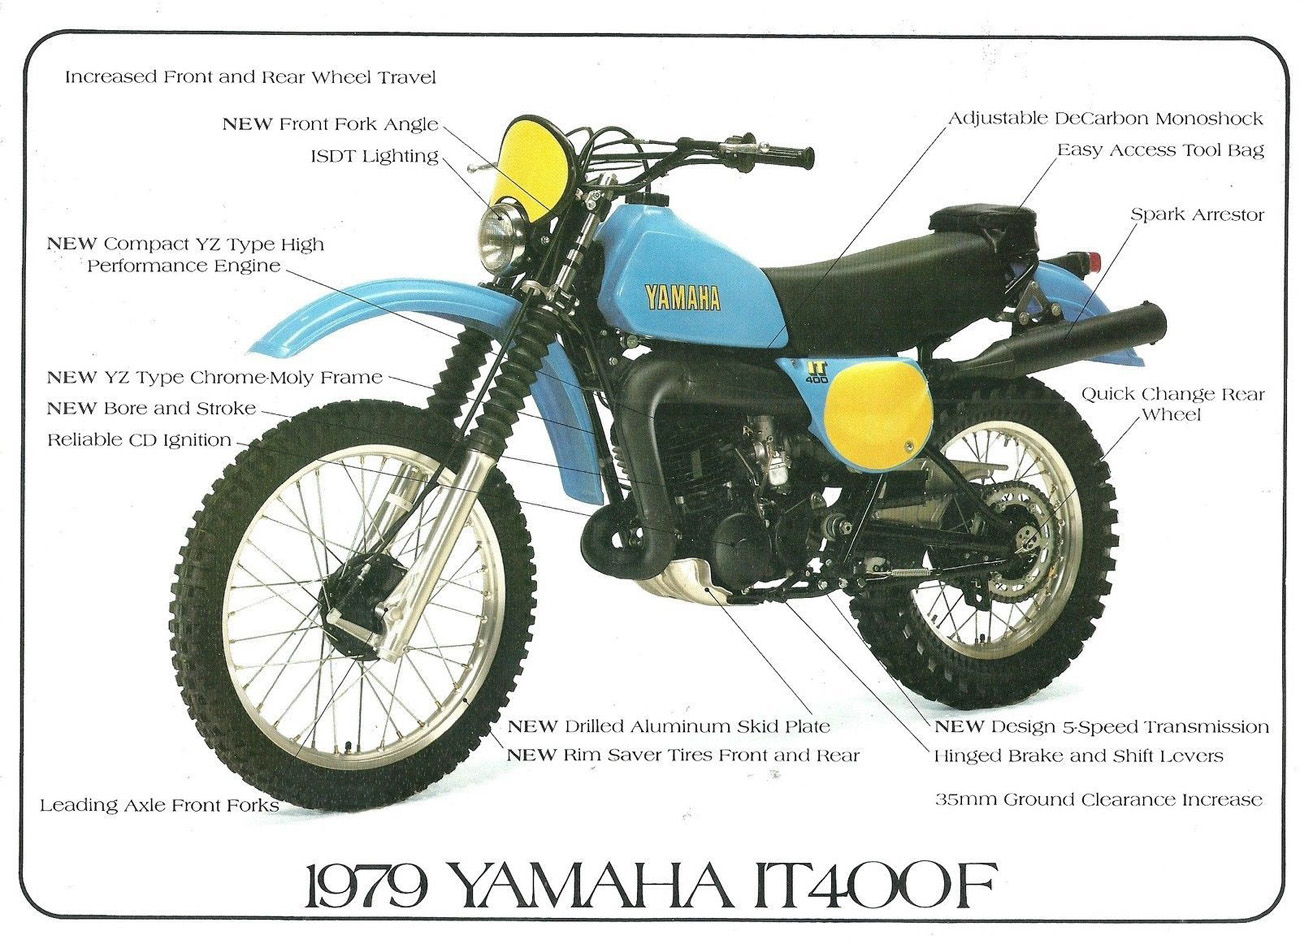 Yamaha IT 400 technical specifications